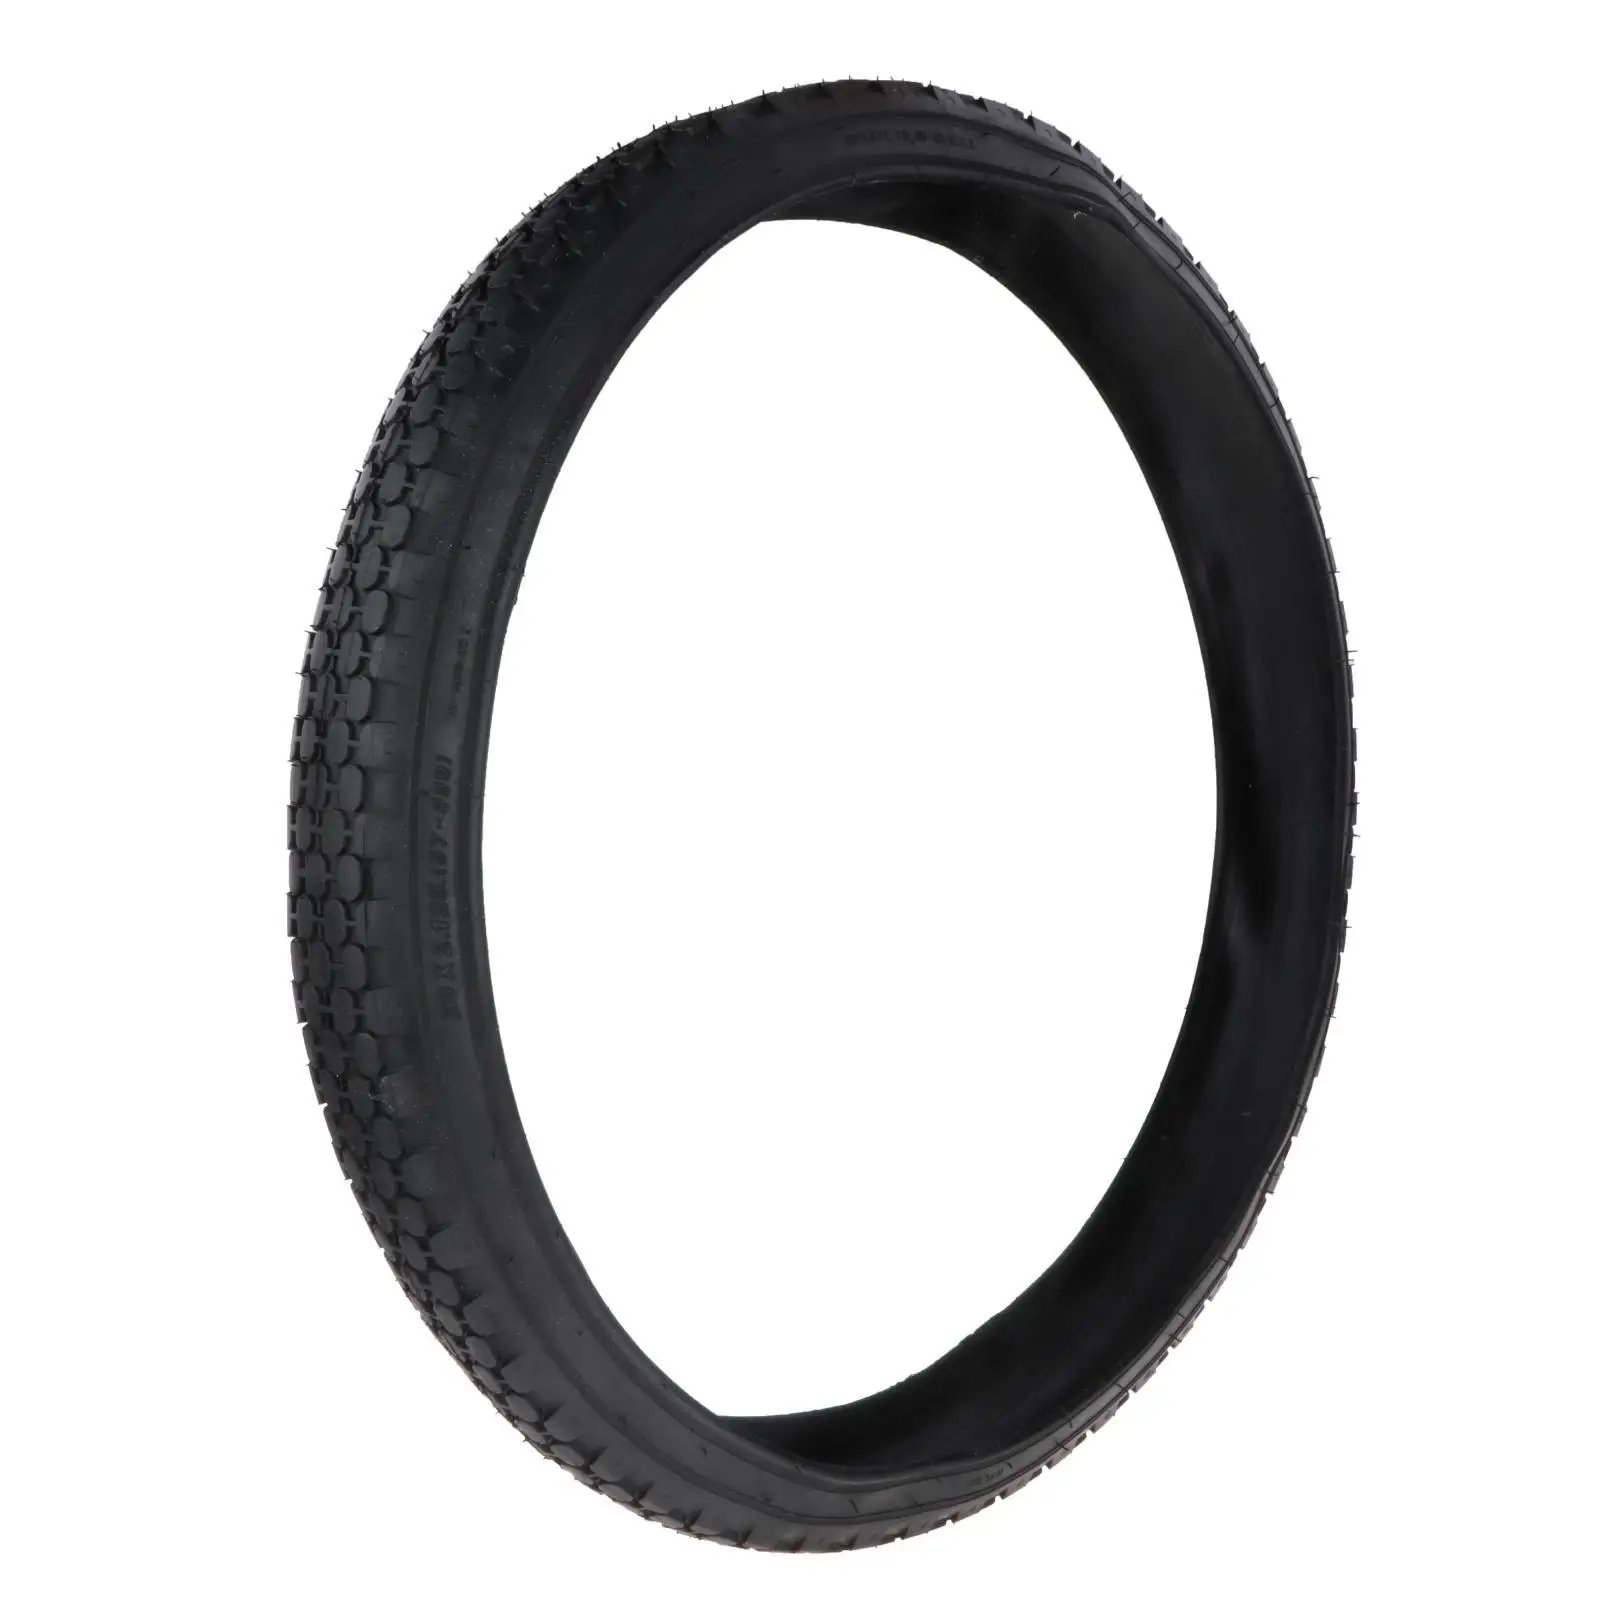 Road Bicycle Tyre 26x2.125 Durable More Grip Puncture Resistant Unfoldable Cycling Parts Replaces for Mountain Bike 